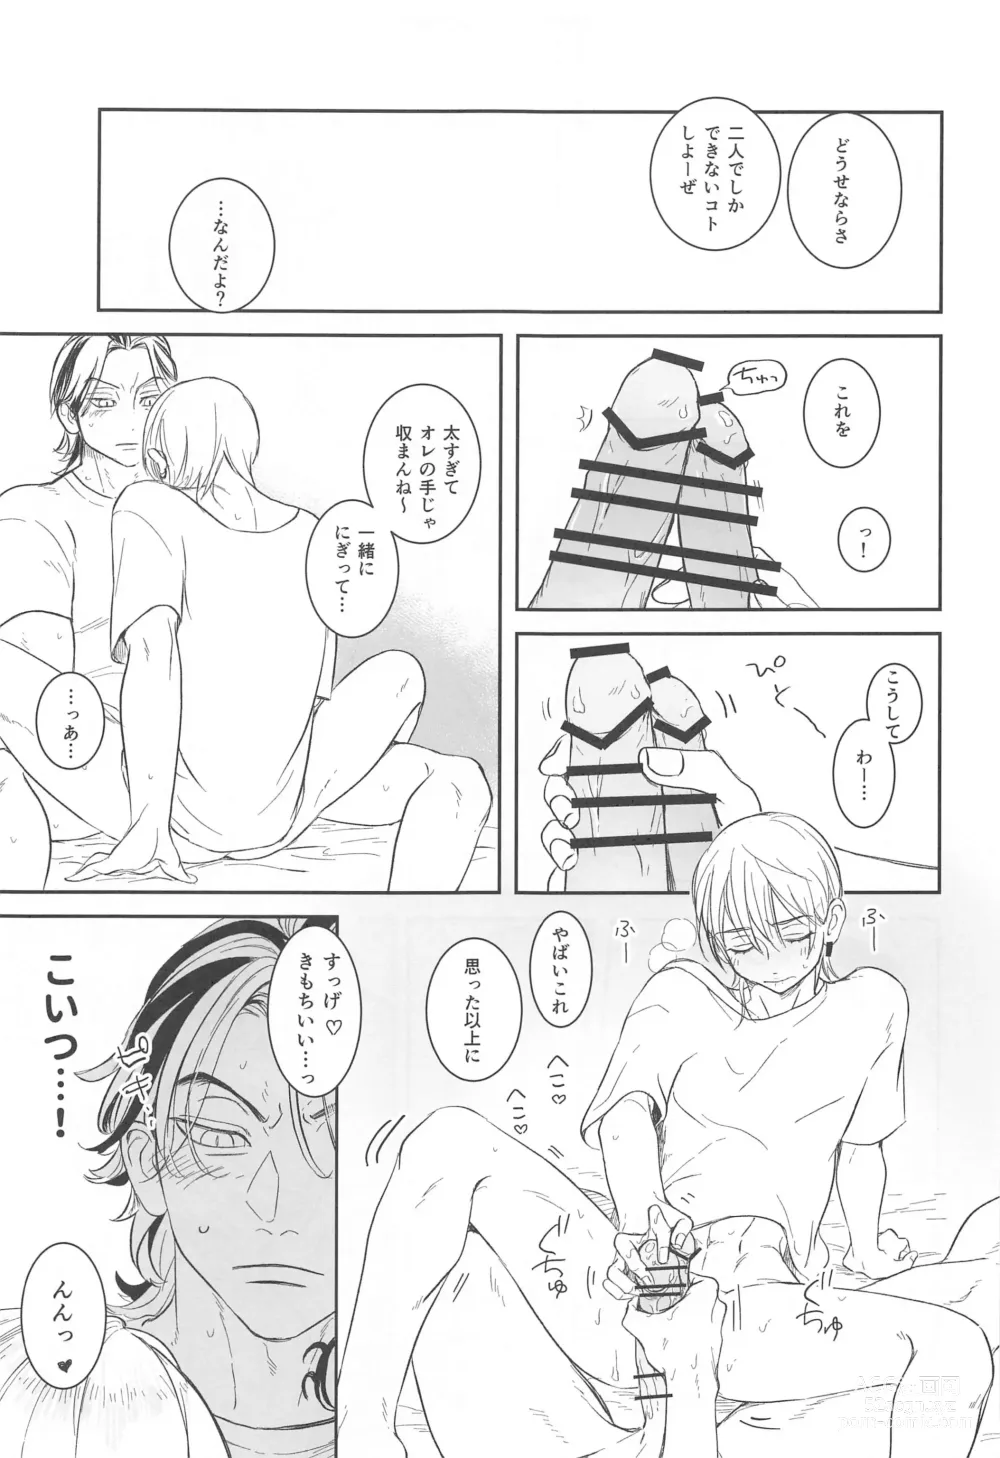 Page 24 of doujinshi Houkago Lesson